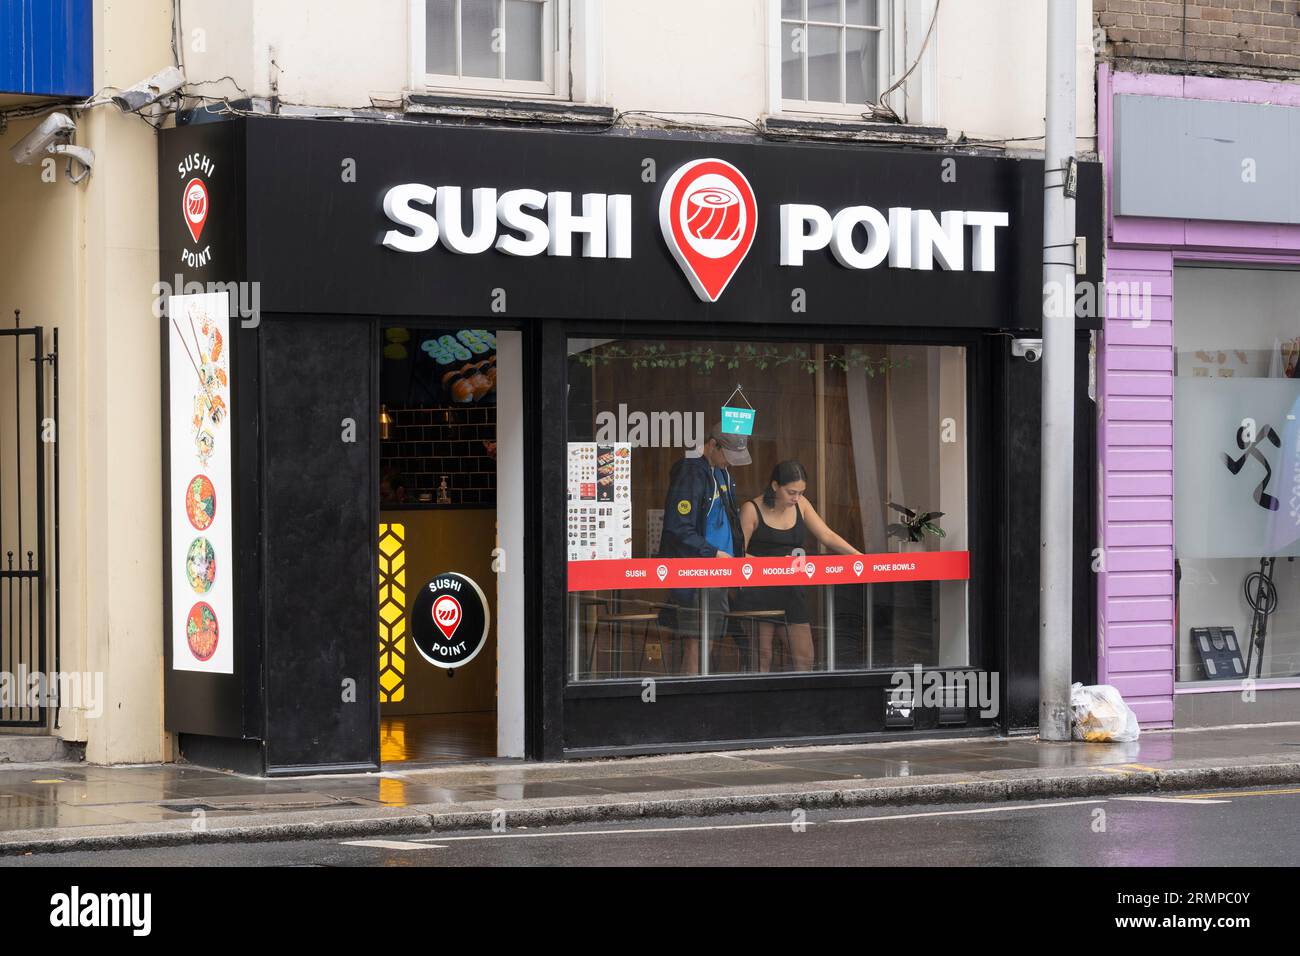 Sushi Point on the A308, an Asian / Japanese styled food takeaway restaurant chain with branches across London. England, UK Stock Photo